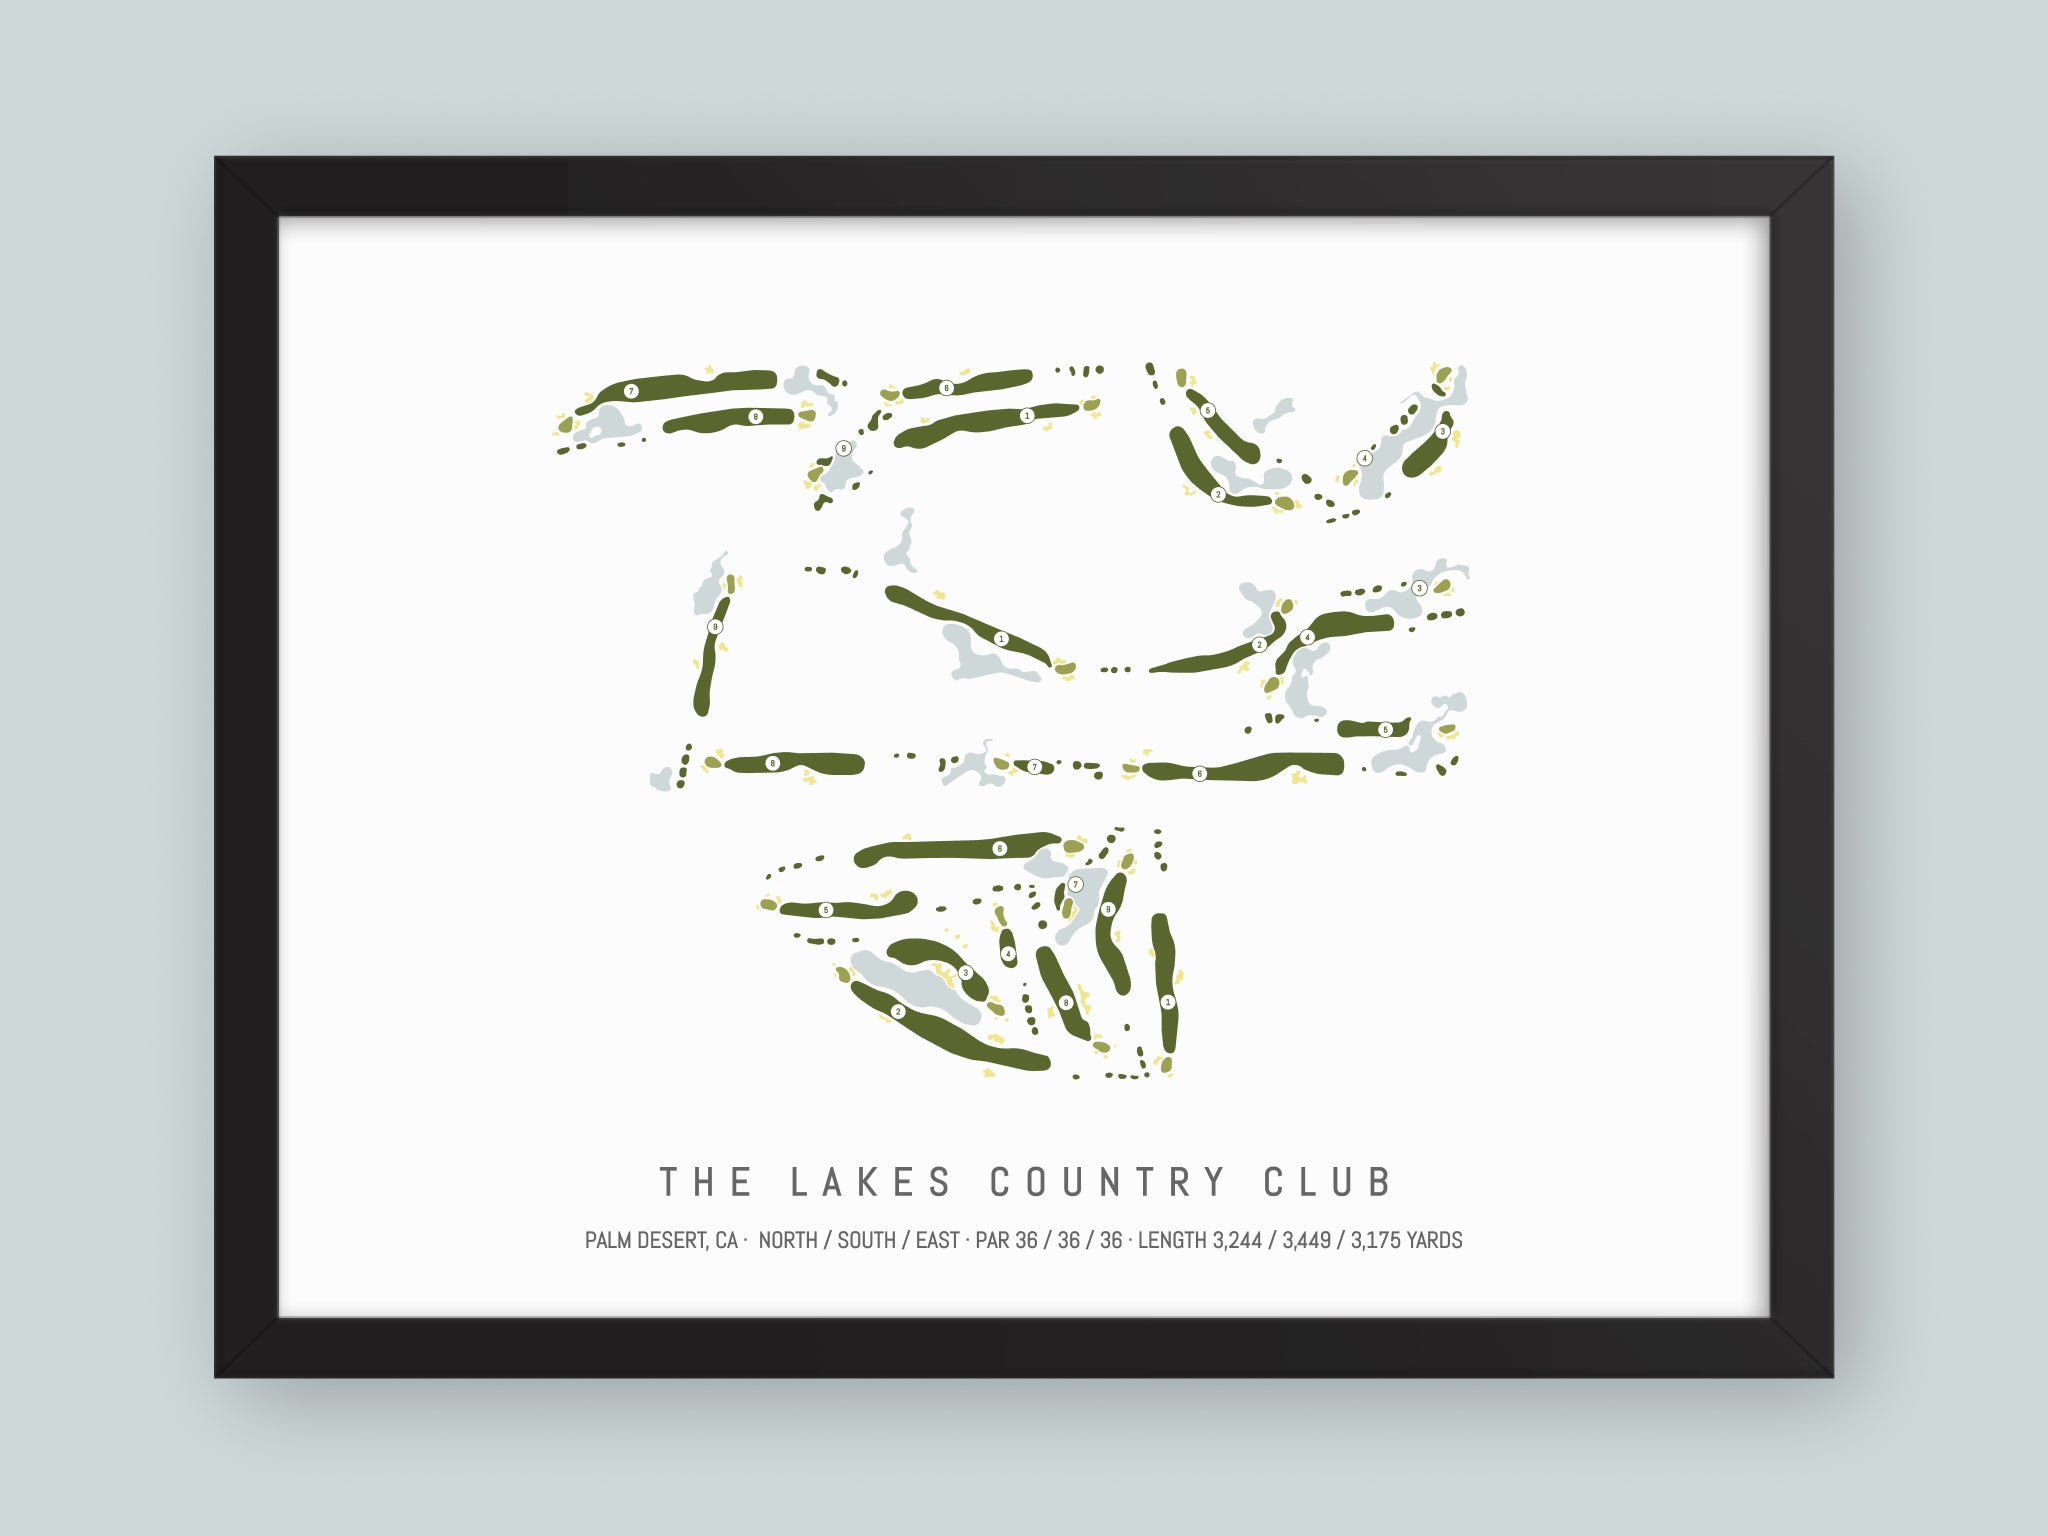 The-Lakes-Country-Club-CA--Black-Frame-24x18-With-Hole-Numbers